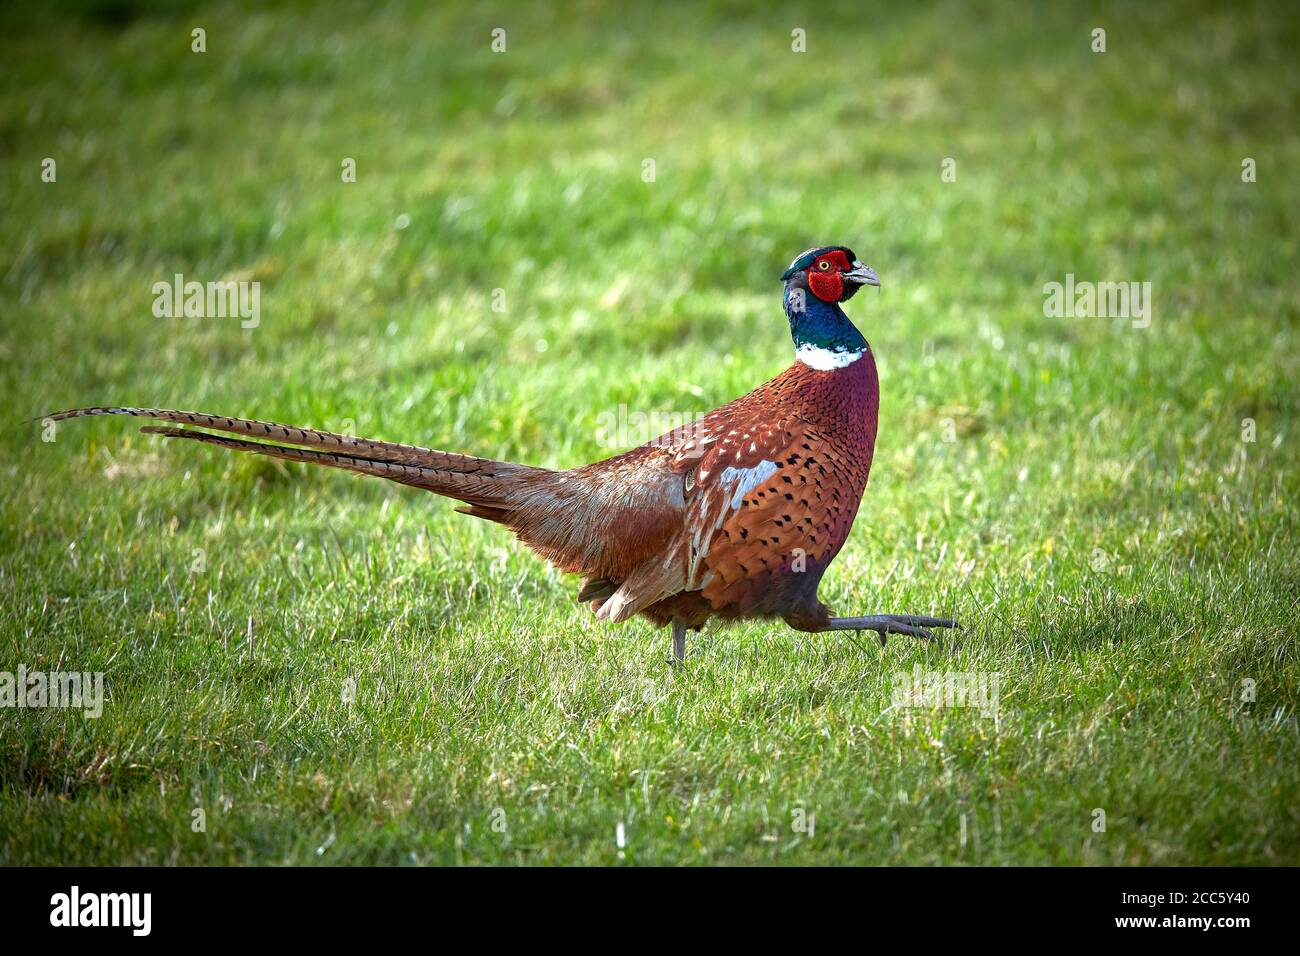 Male common pheasant (Phasianus Colchicus) running against a green grass background Stock Photo